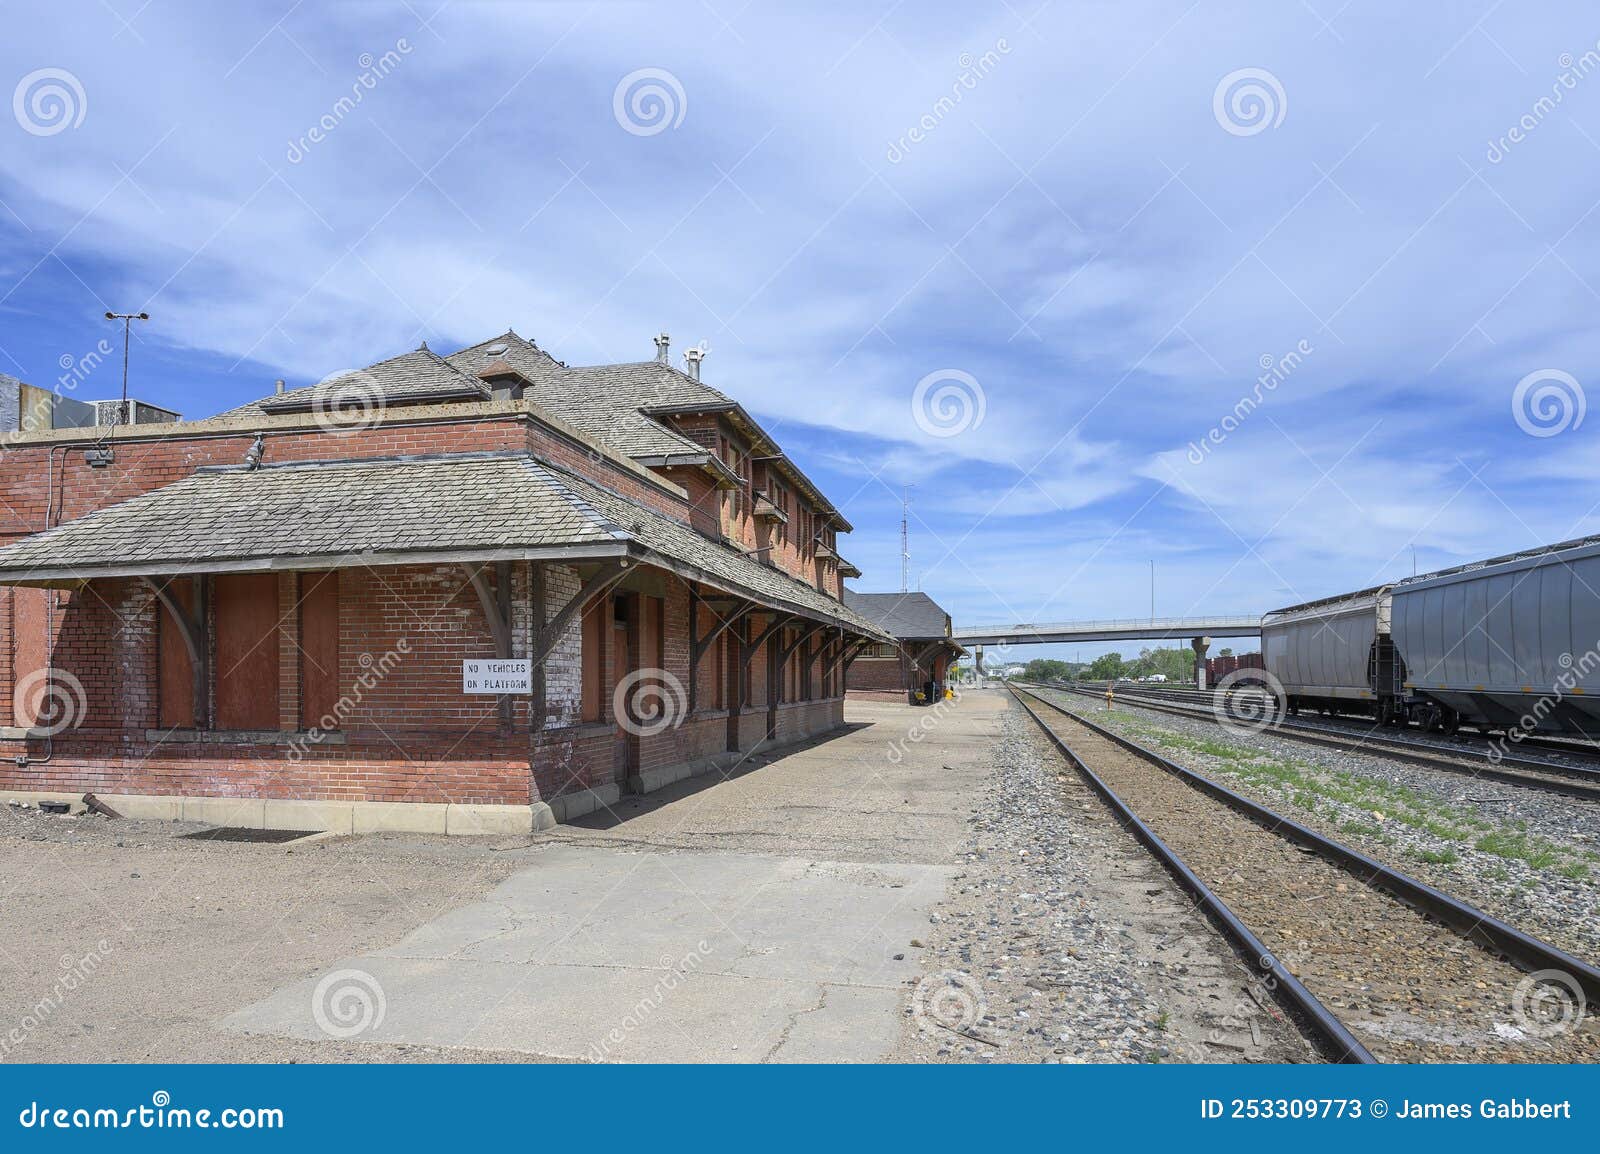 old train station in swift current